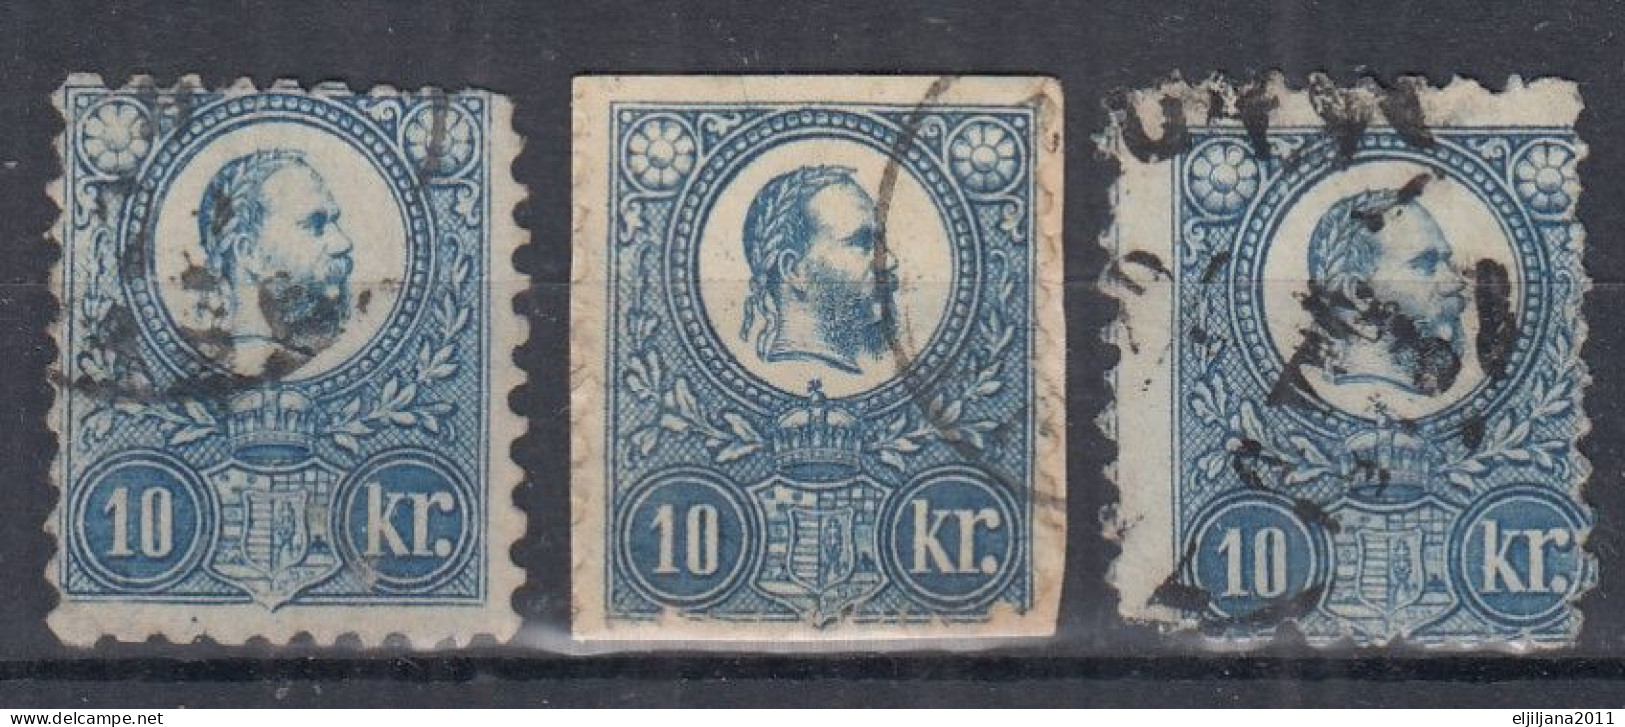 ⁕ Hungary 1871 ⁕ Franz Josef 10 Kr. ⁕ 3v used / canceled (unchecked) - see scan